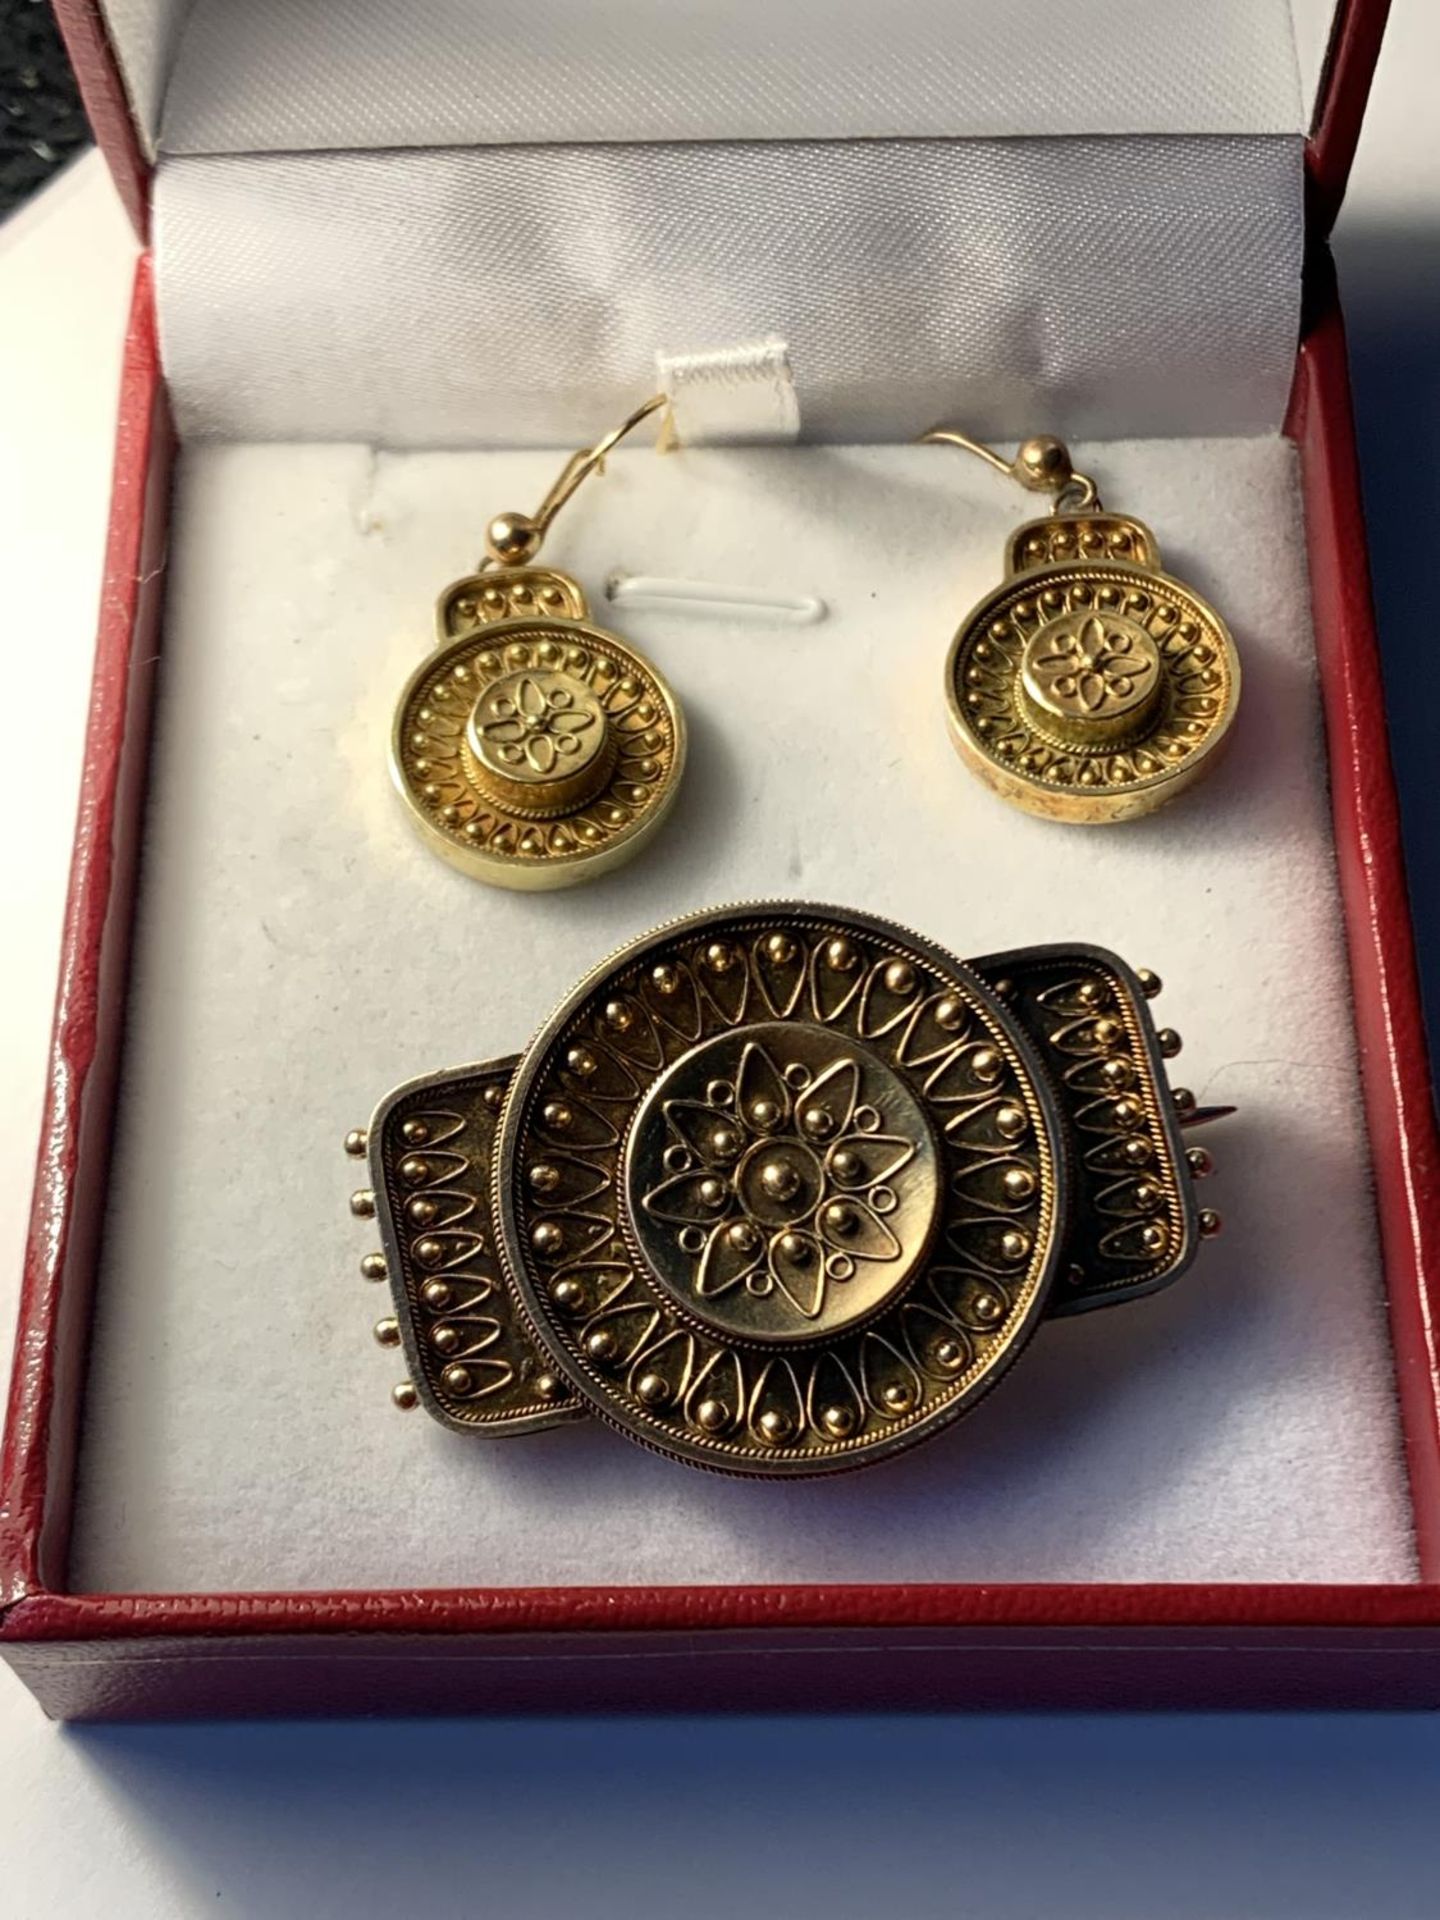 A 15 CARAT GOLD EARRING AND BROOCH SET IN A PRESENTATION BOX GROSS WEIGHT 18.5 GRAMS